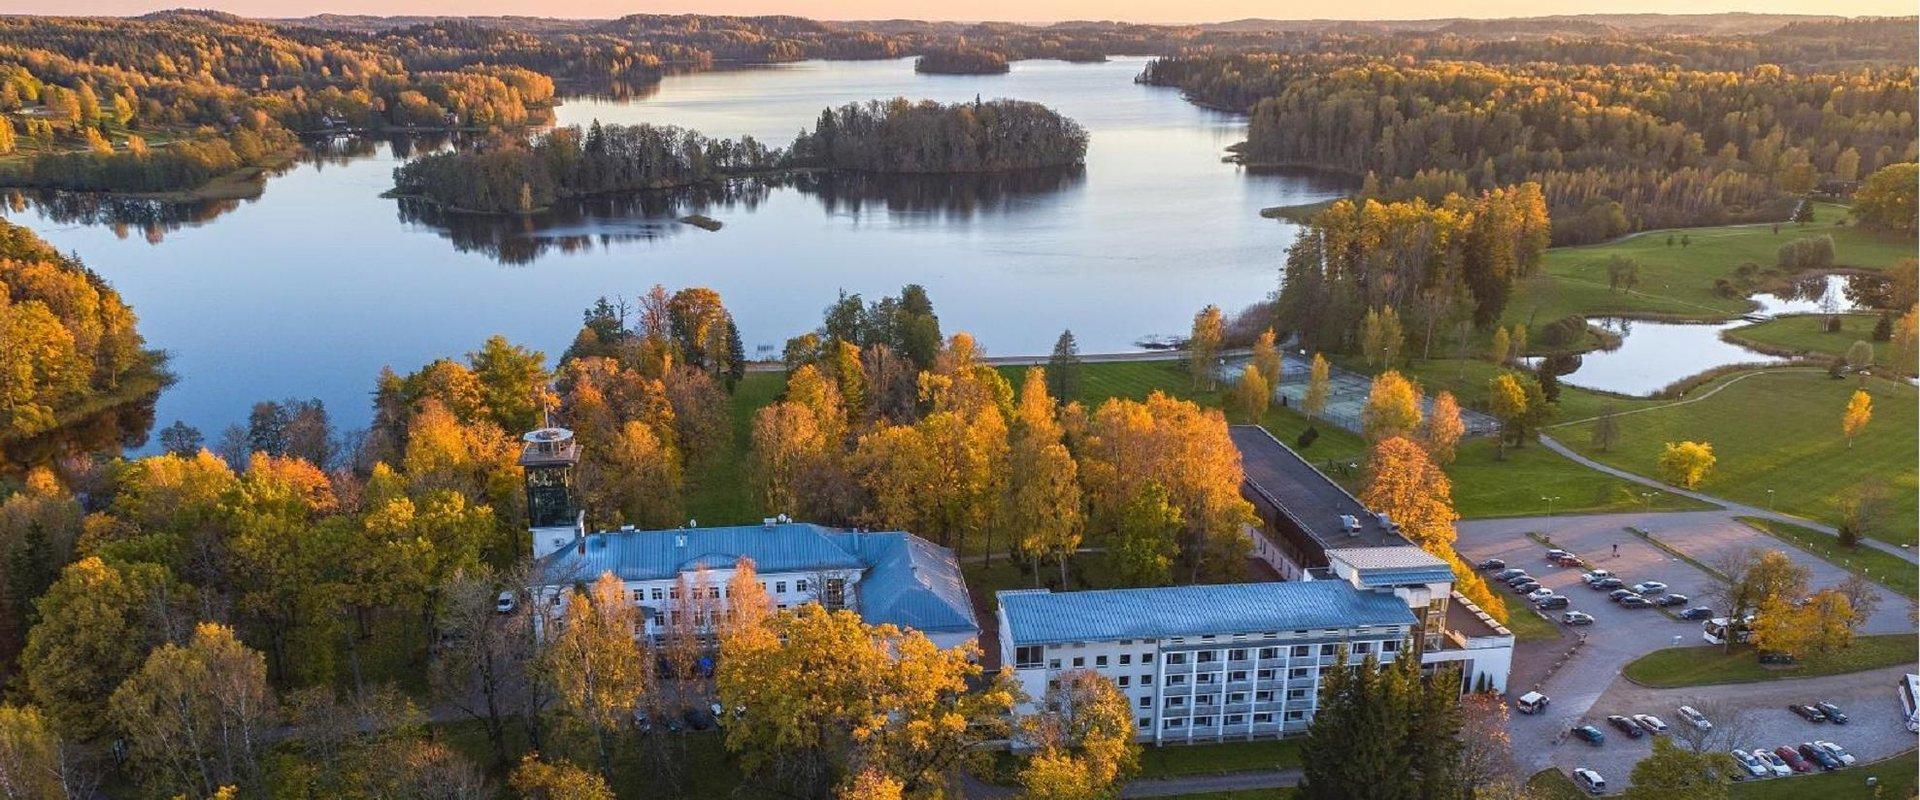 Pühajärve Hotel awaits you on the shores of the beautiful Lake Pühajärv, over which some of our rooms enjoy unforgettable views. Here at our cosy hote